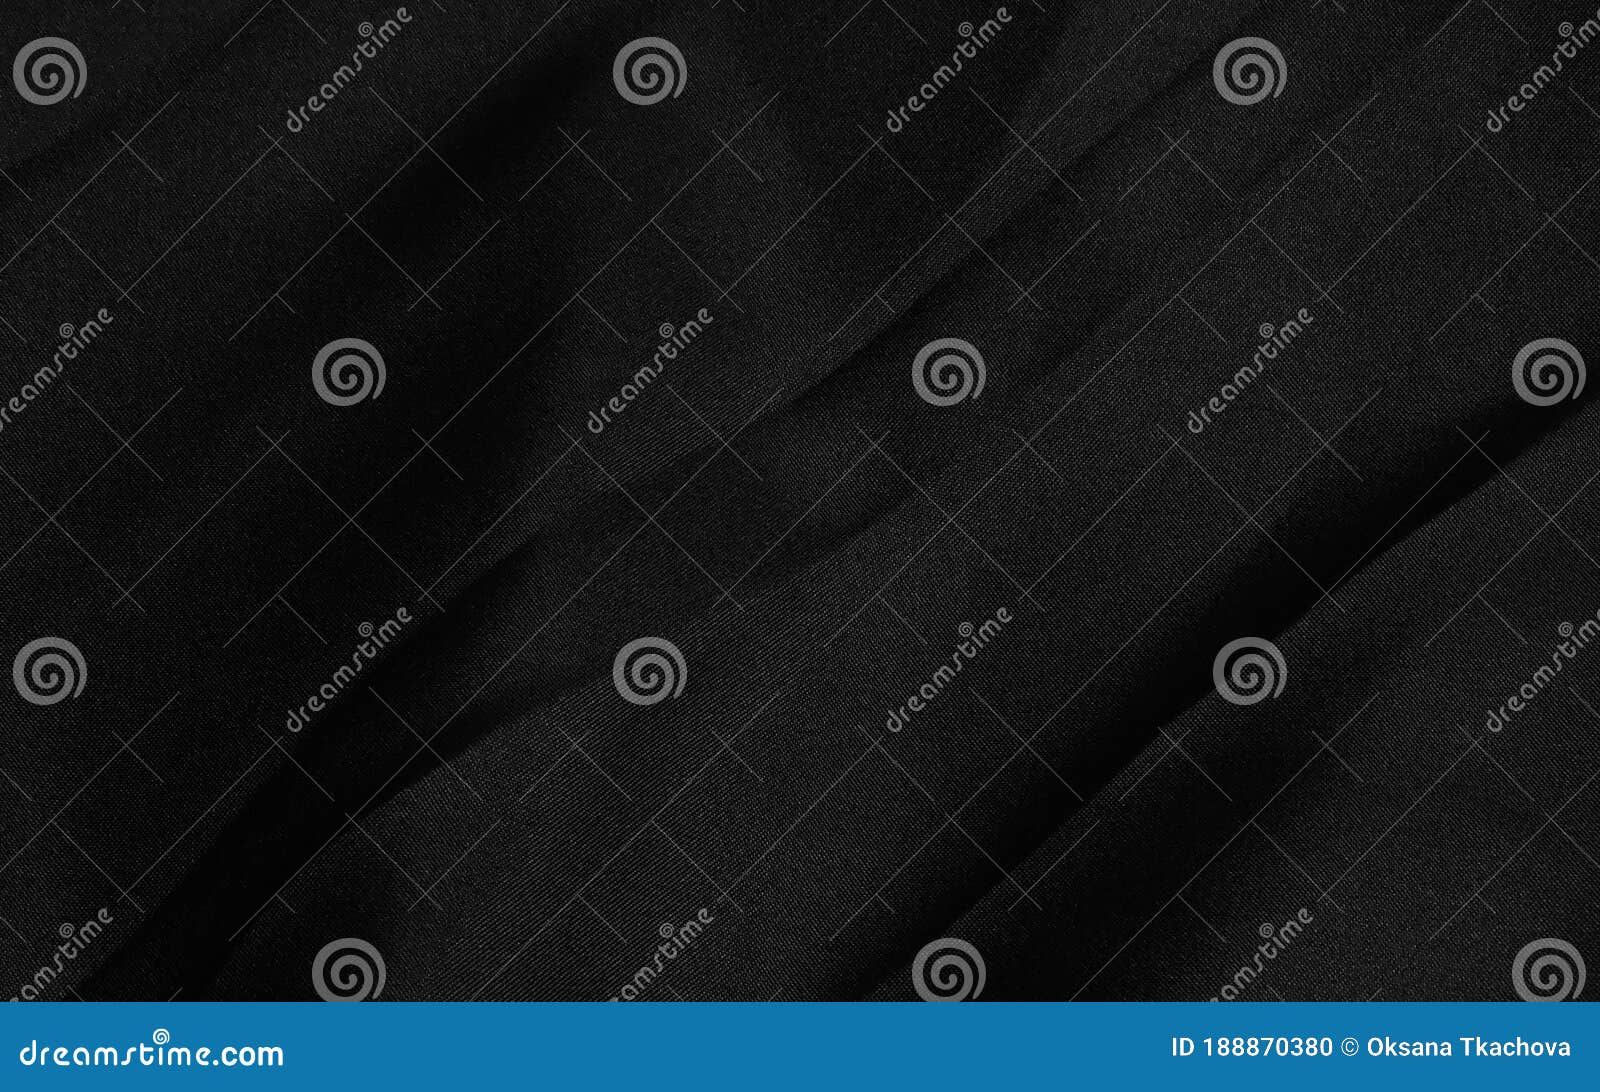 Black Crumpled Fabric Texture Background Stock Photo - Image of surface ...